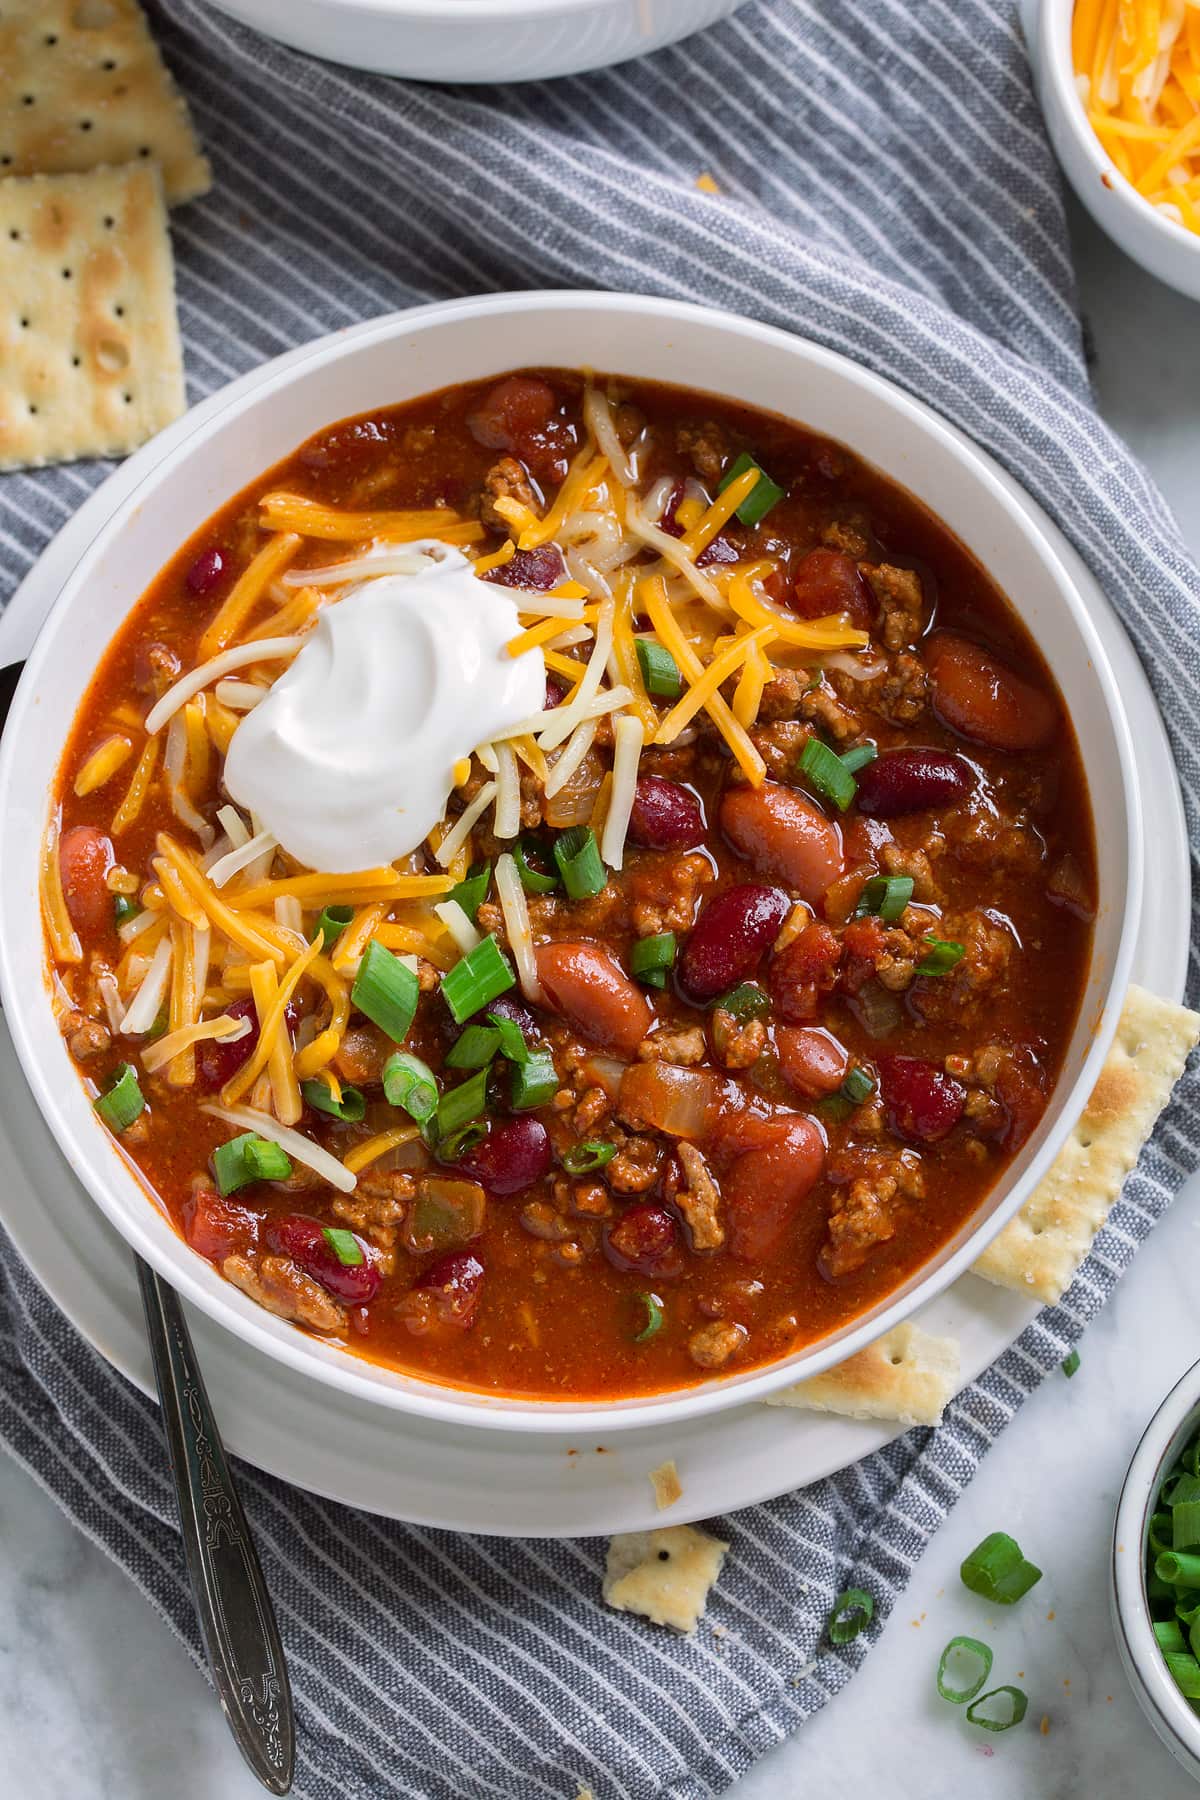 Overhead image of bowl of chili topped with cheddar, sour cream and green onions.